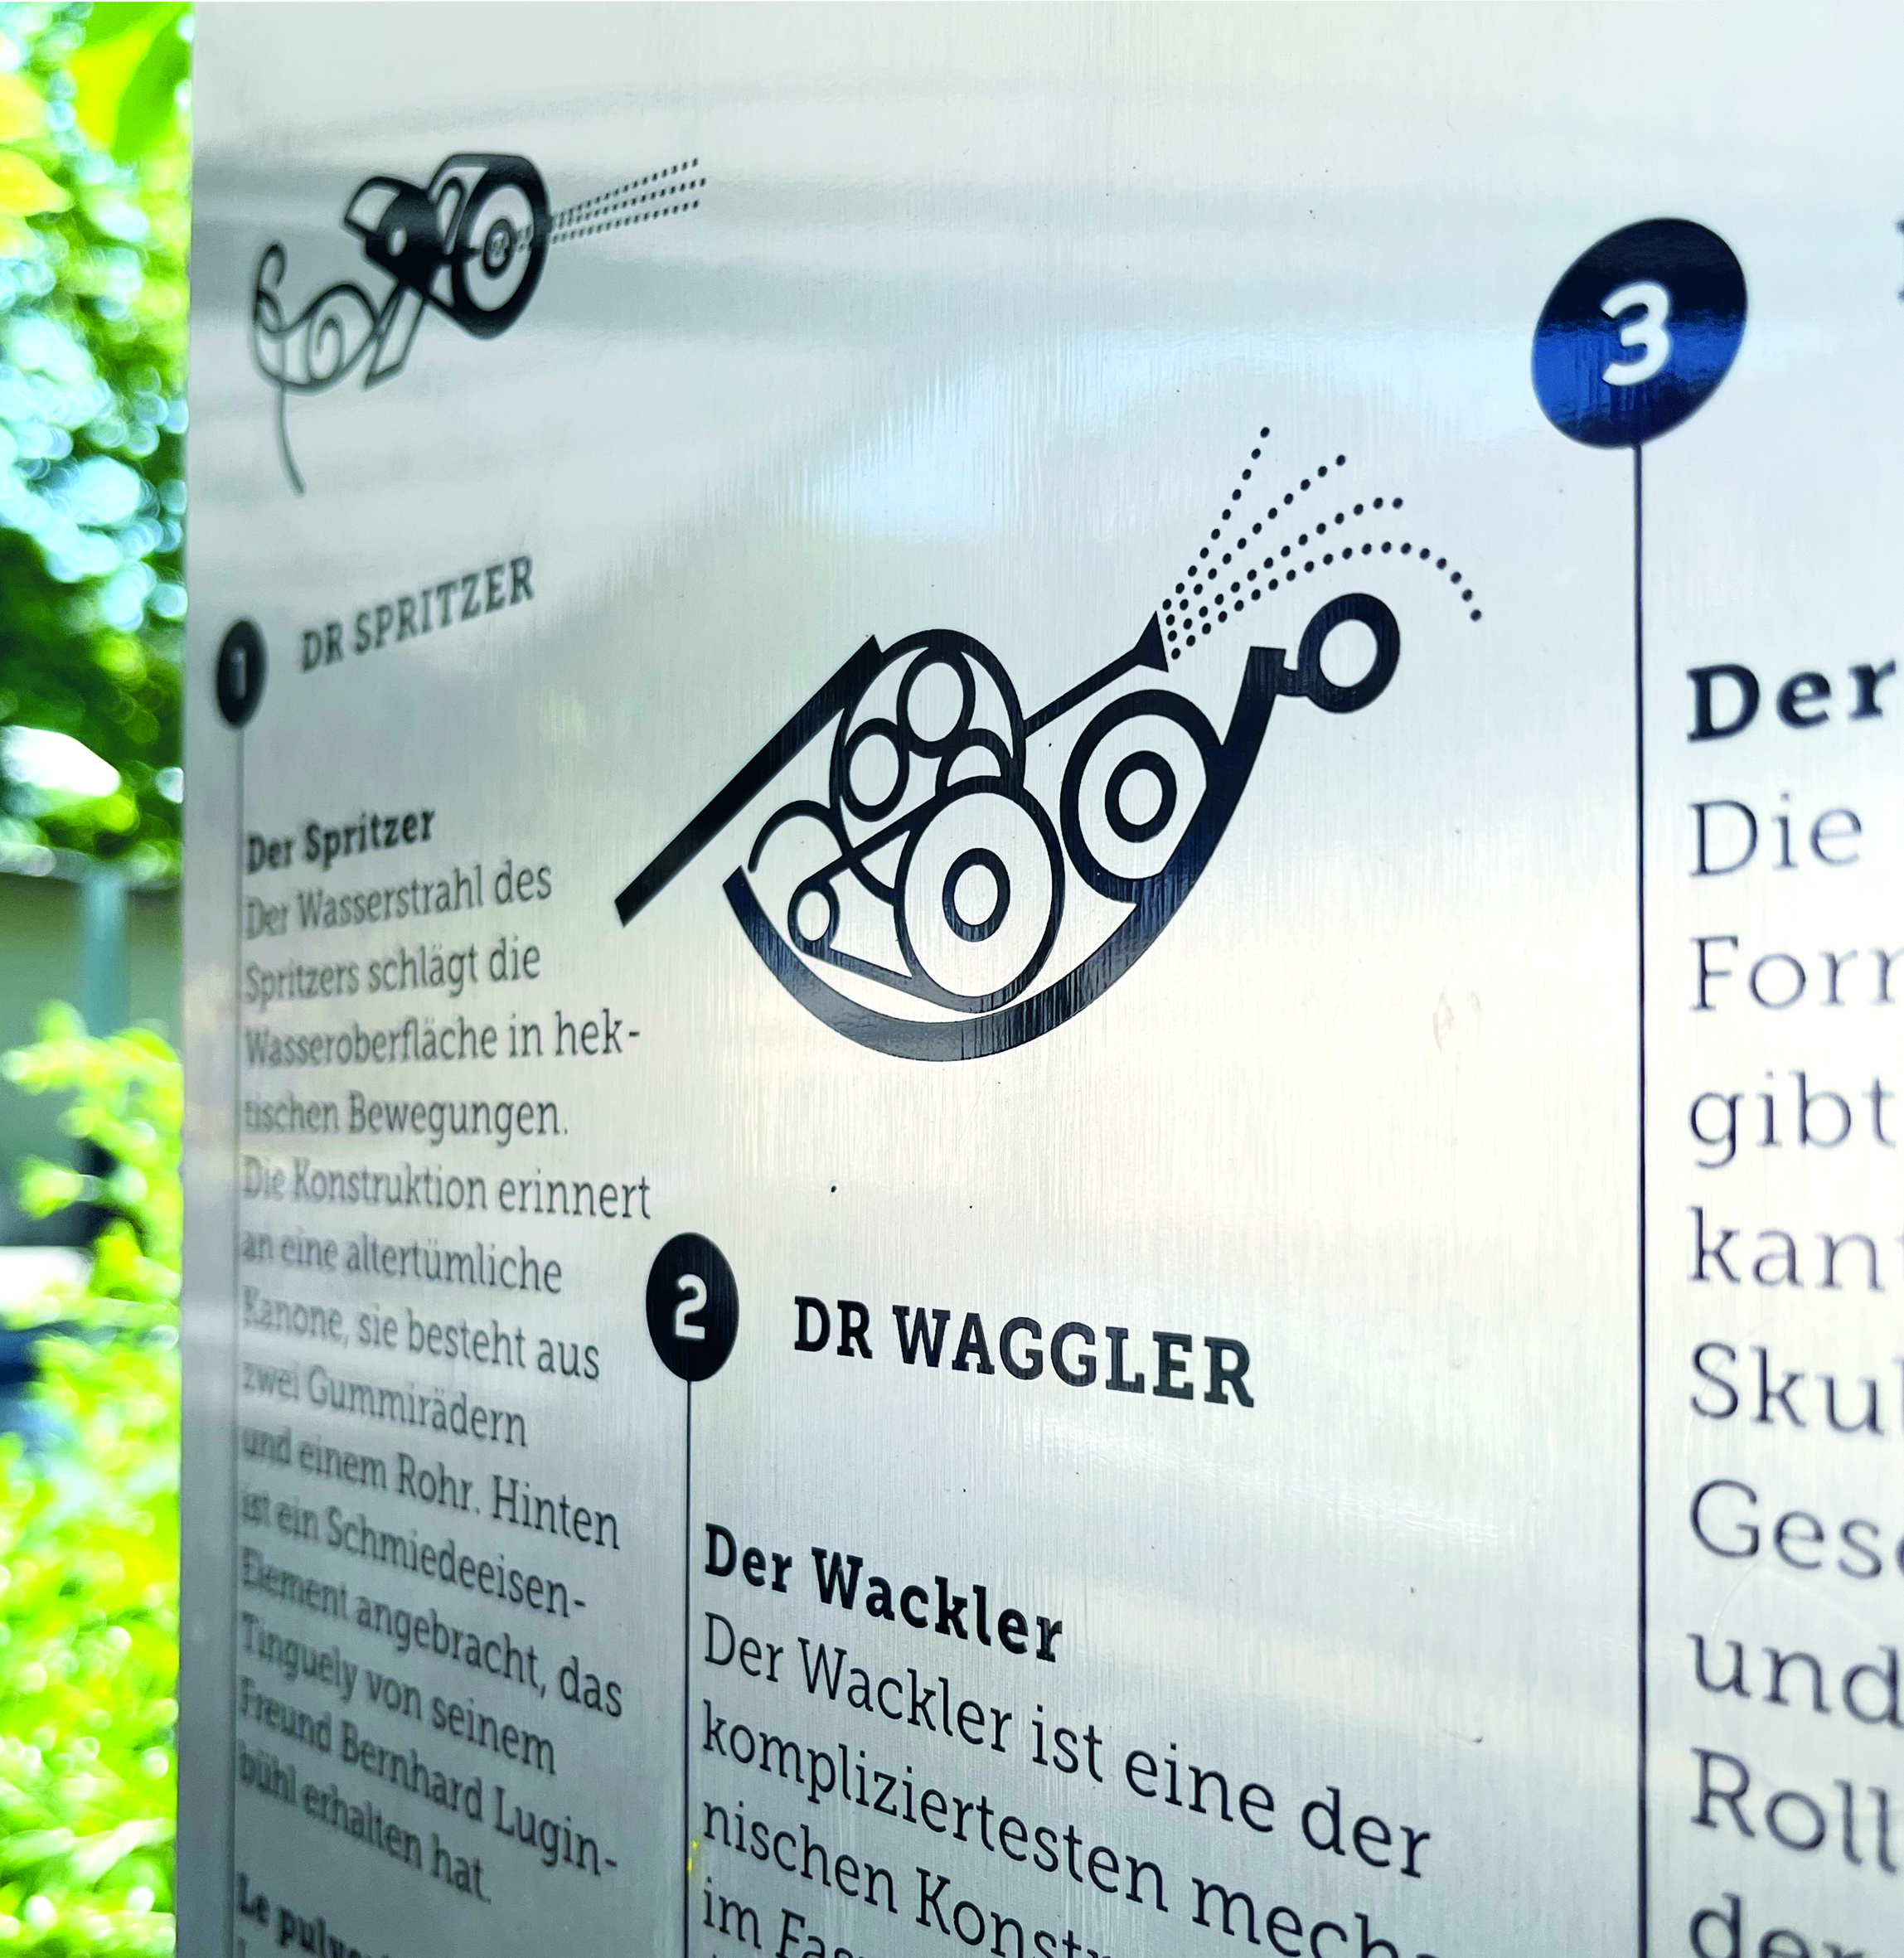 https://www.sarahweishaupt.ch/media/pages/home/illustrationen-schild-fasnachtsbrunnen-museum-tinguely-basel/e2c791a236-1685531159/img_5102.jpg